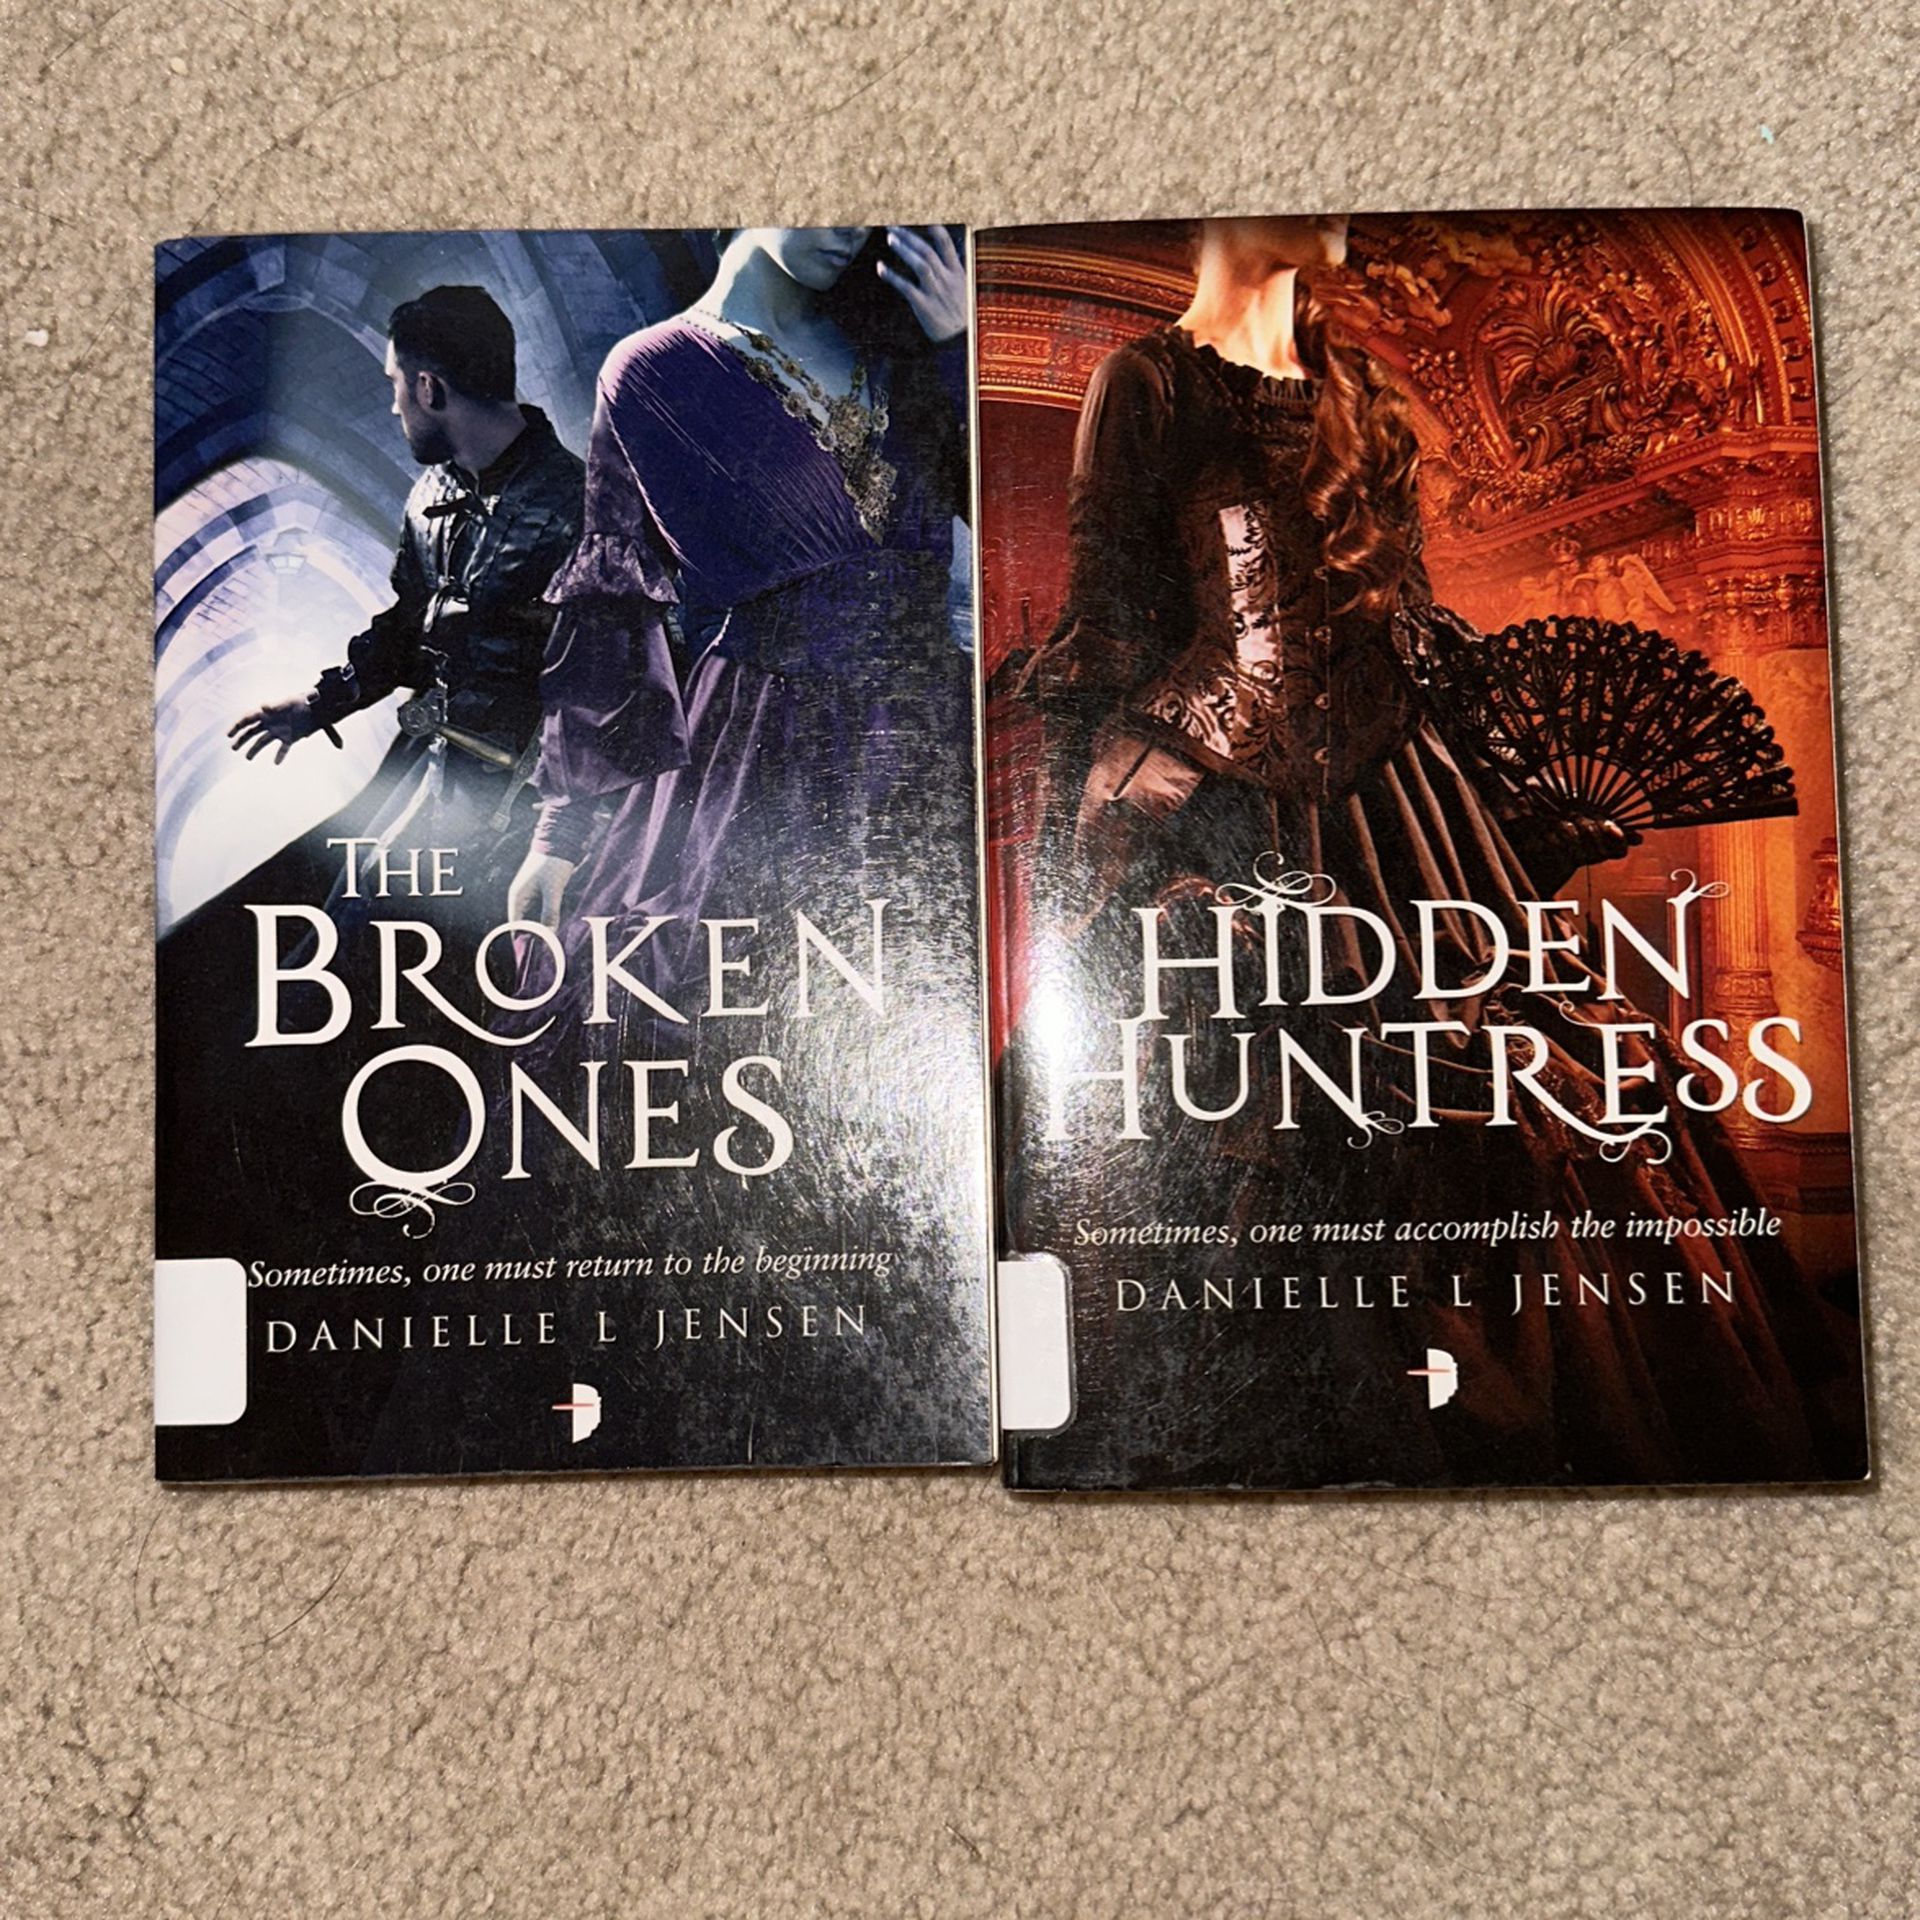 The Broken Ones And Hidden Huntress Book 1 & 2 Young Adult By Danielle Jensen